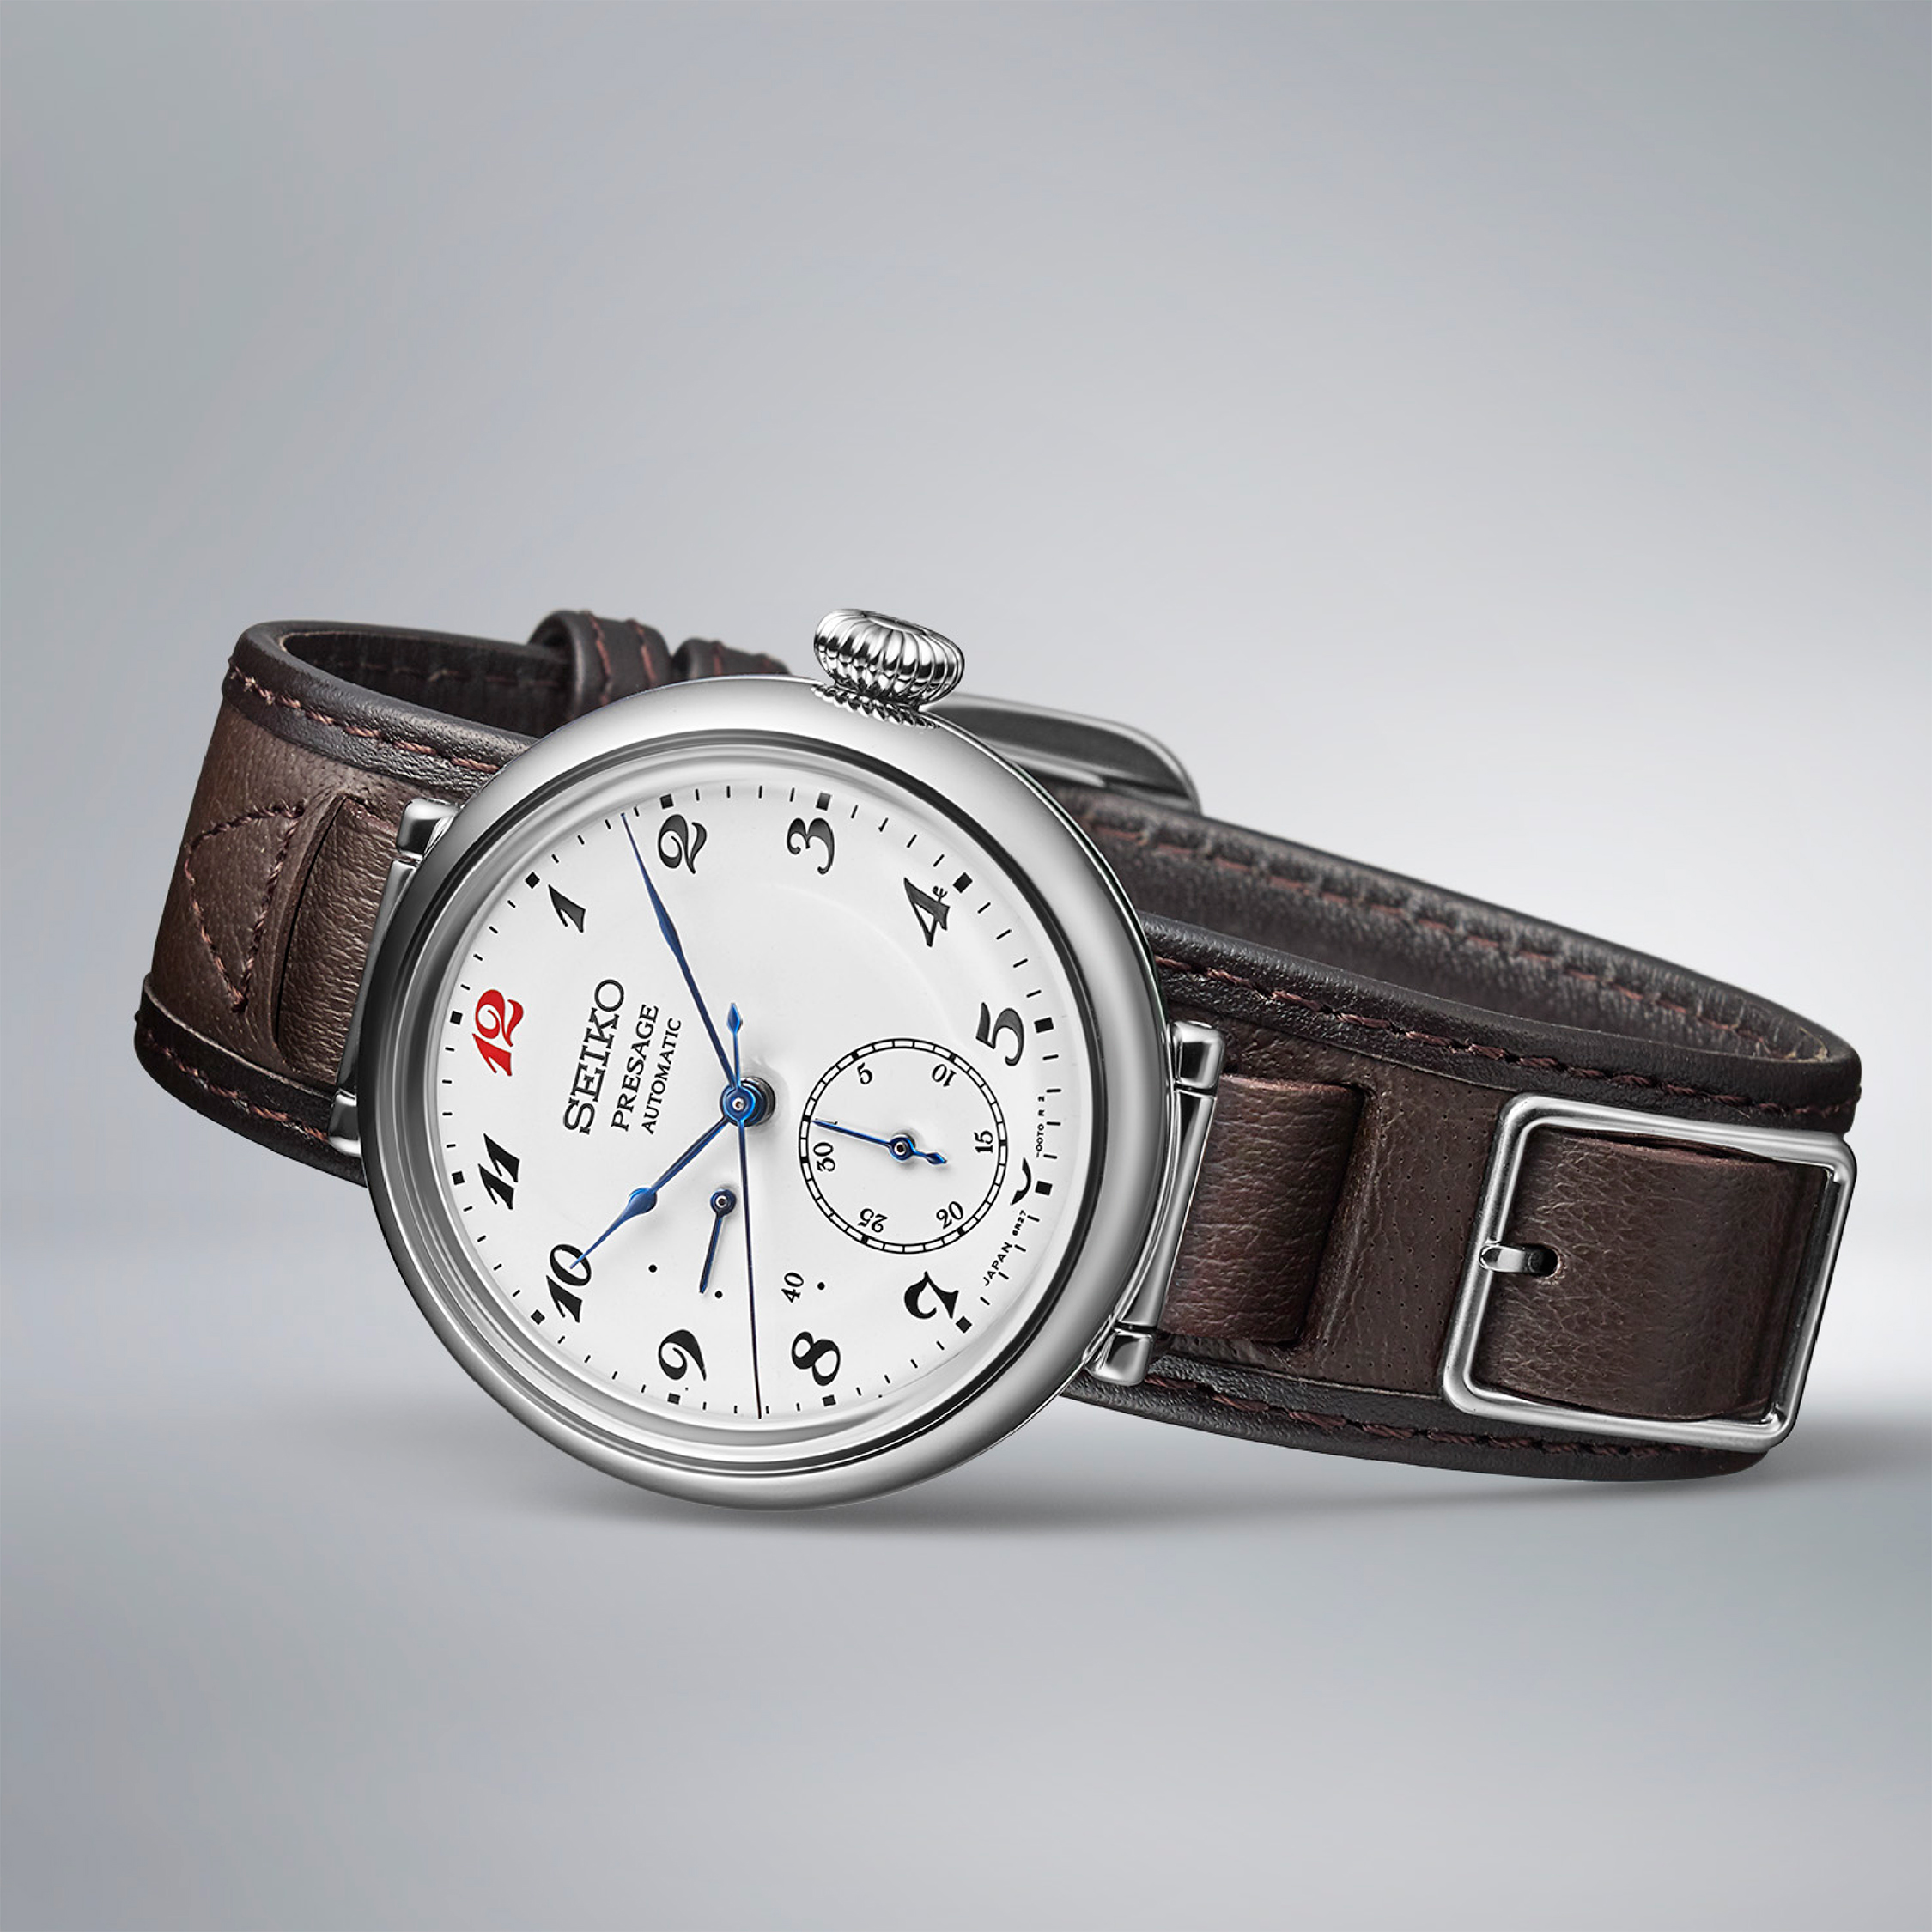 Seiko Celebrates its First Wristwatch With Limited Presage Model